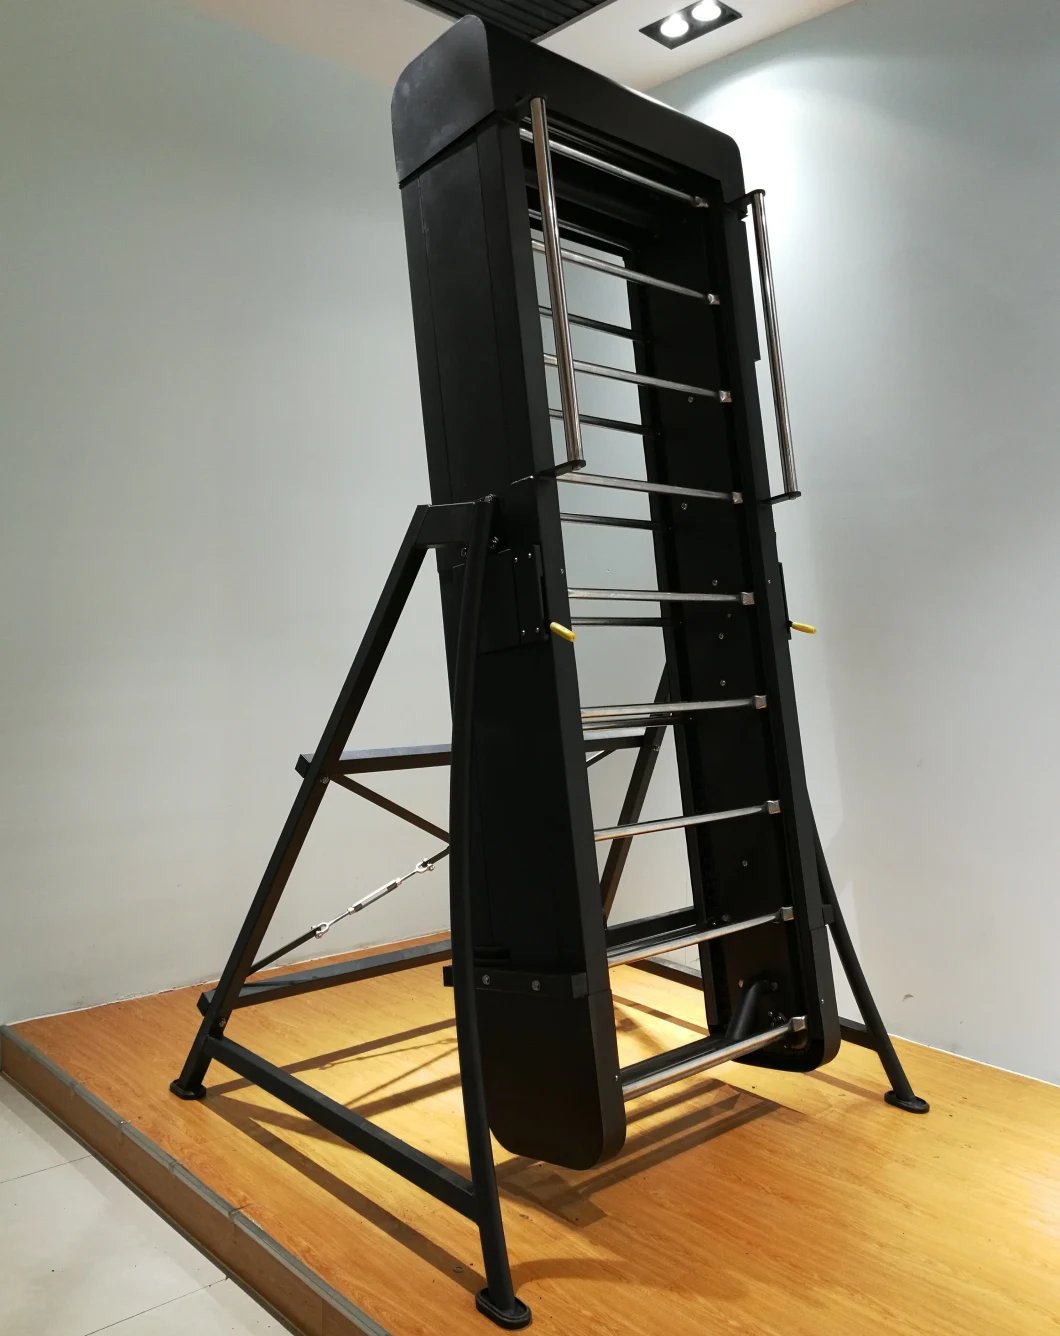 2019 Best Commercial Commercial Gym Equipment Laddermill Climbing Machine